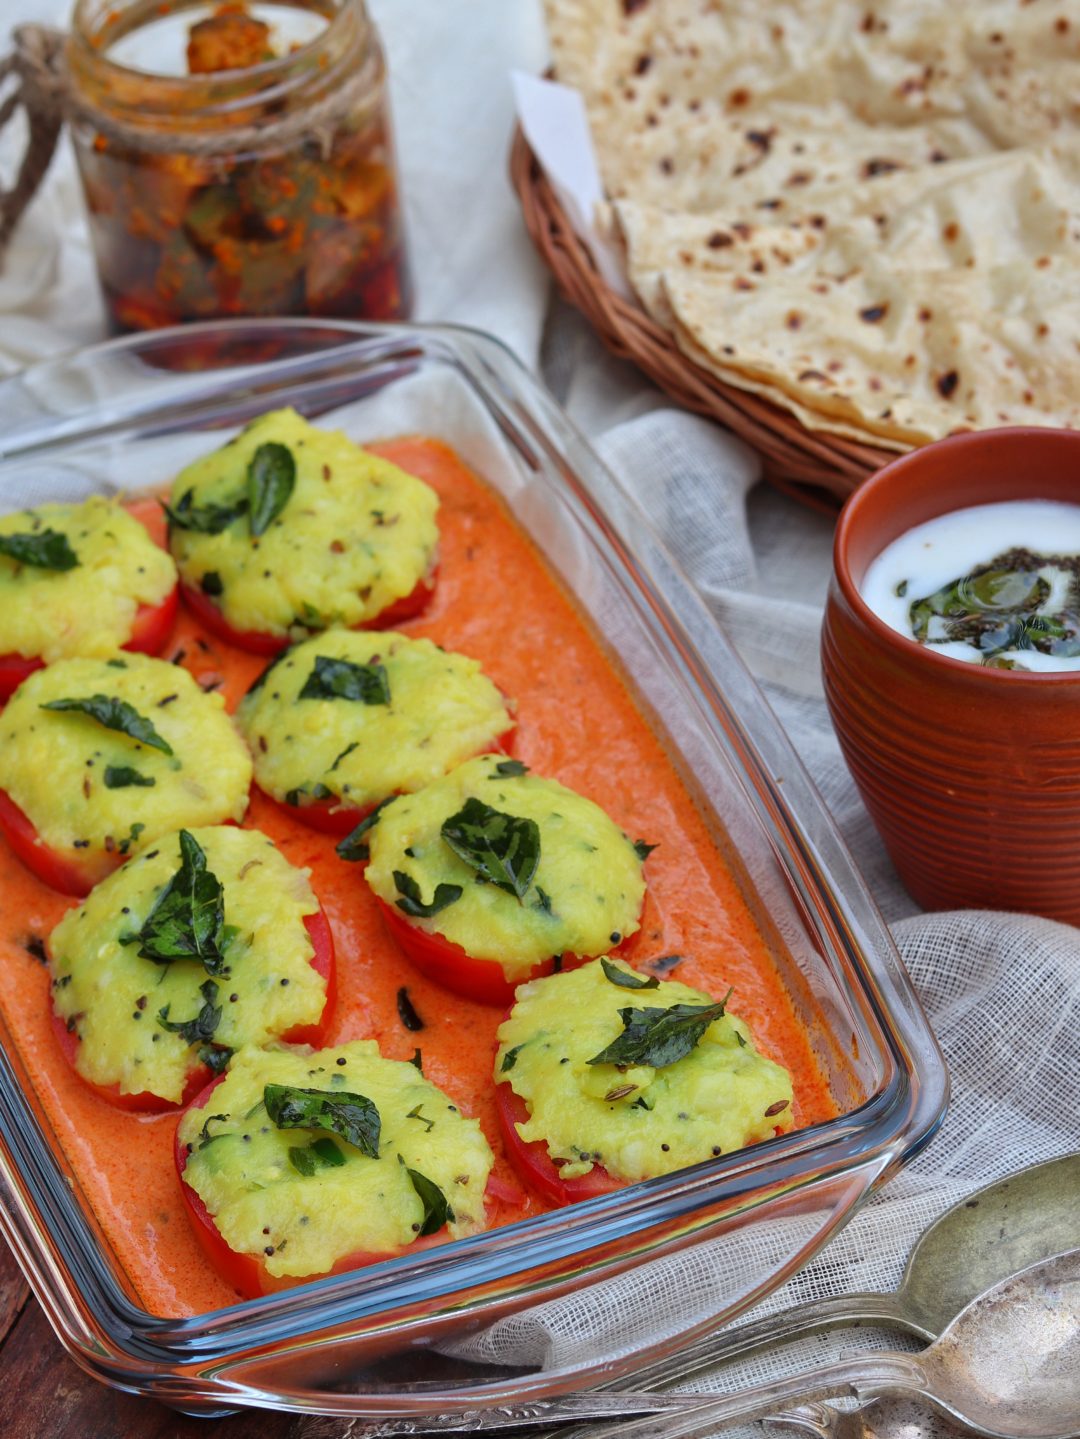 Stuffed Tomatoes Baked in a Makhani Gravy